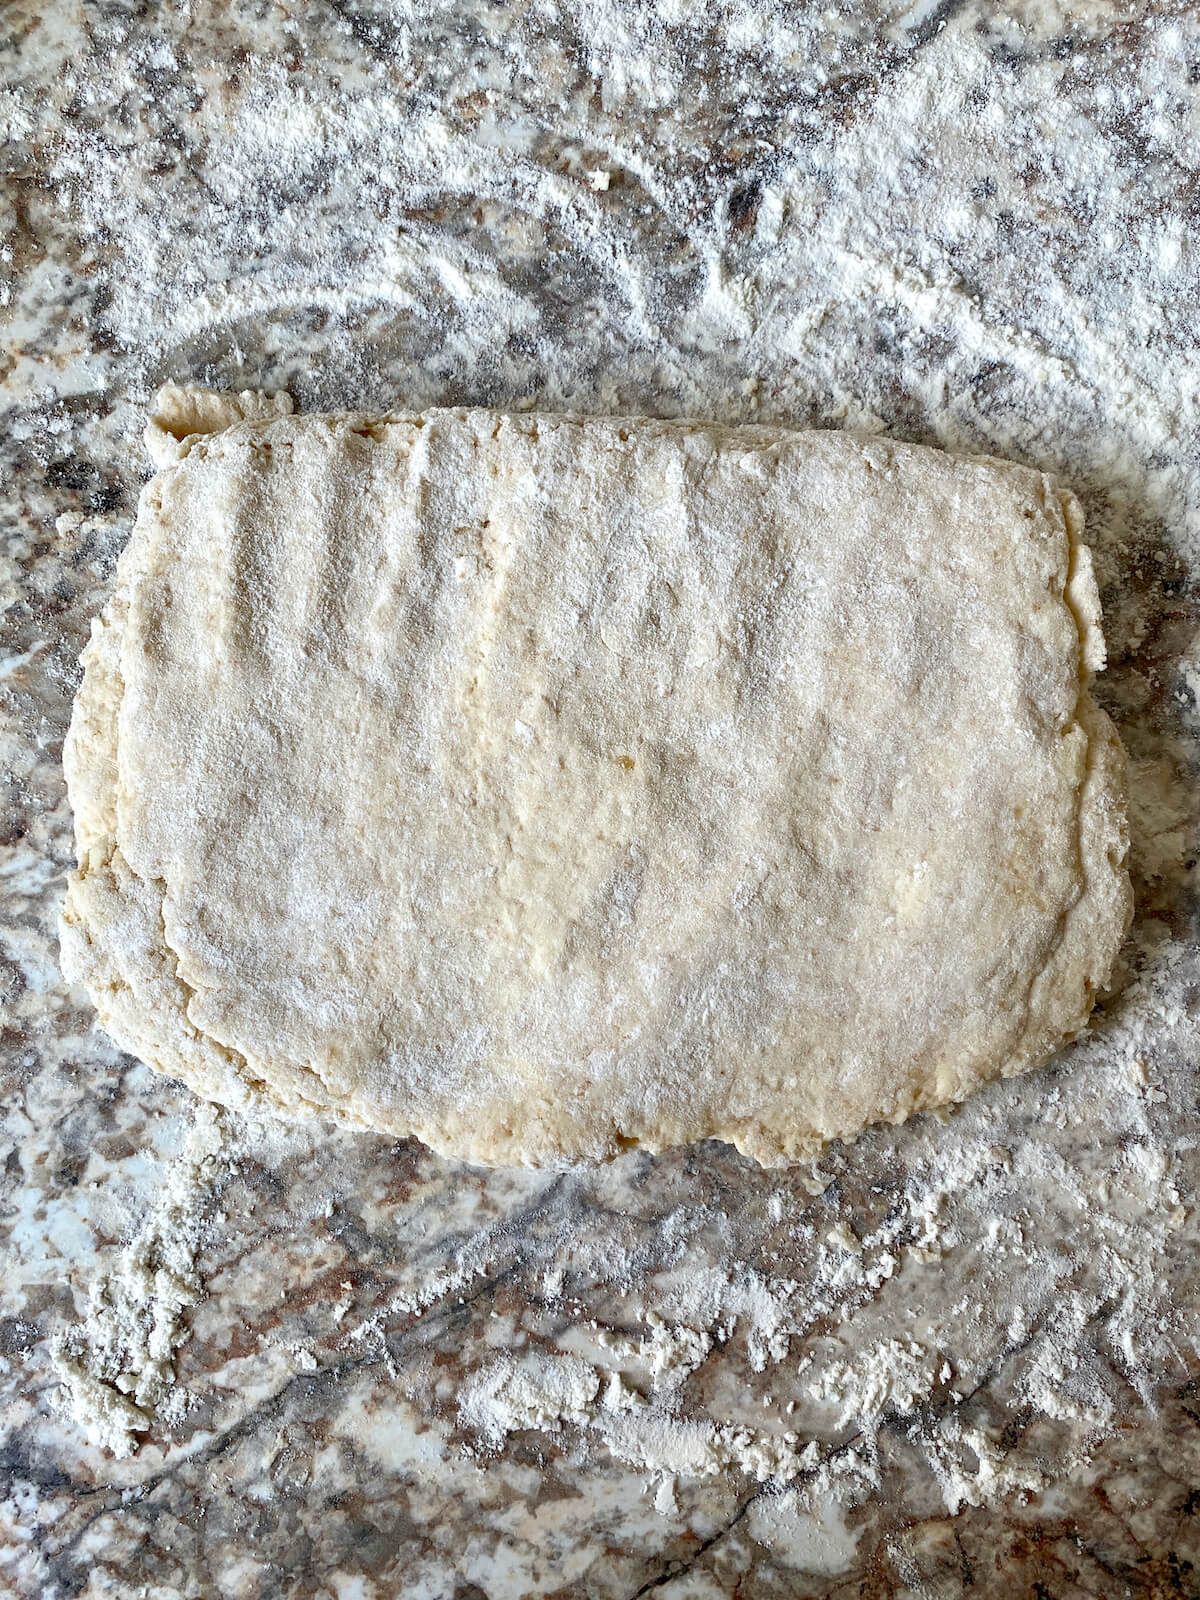 The biscuit dough after being kneaded and pressed into a rectangle on the counter.